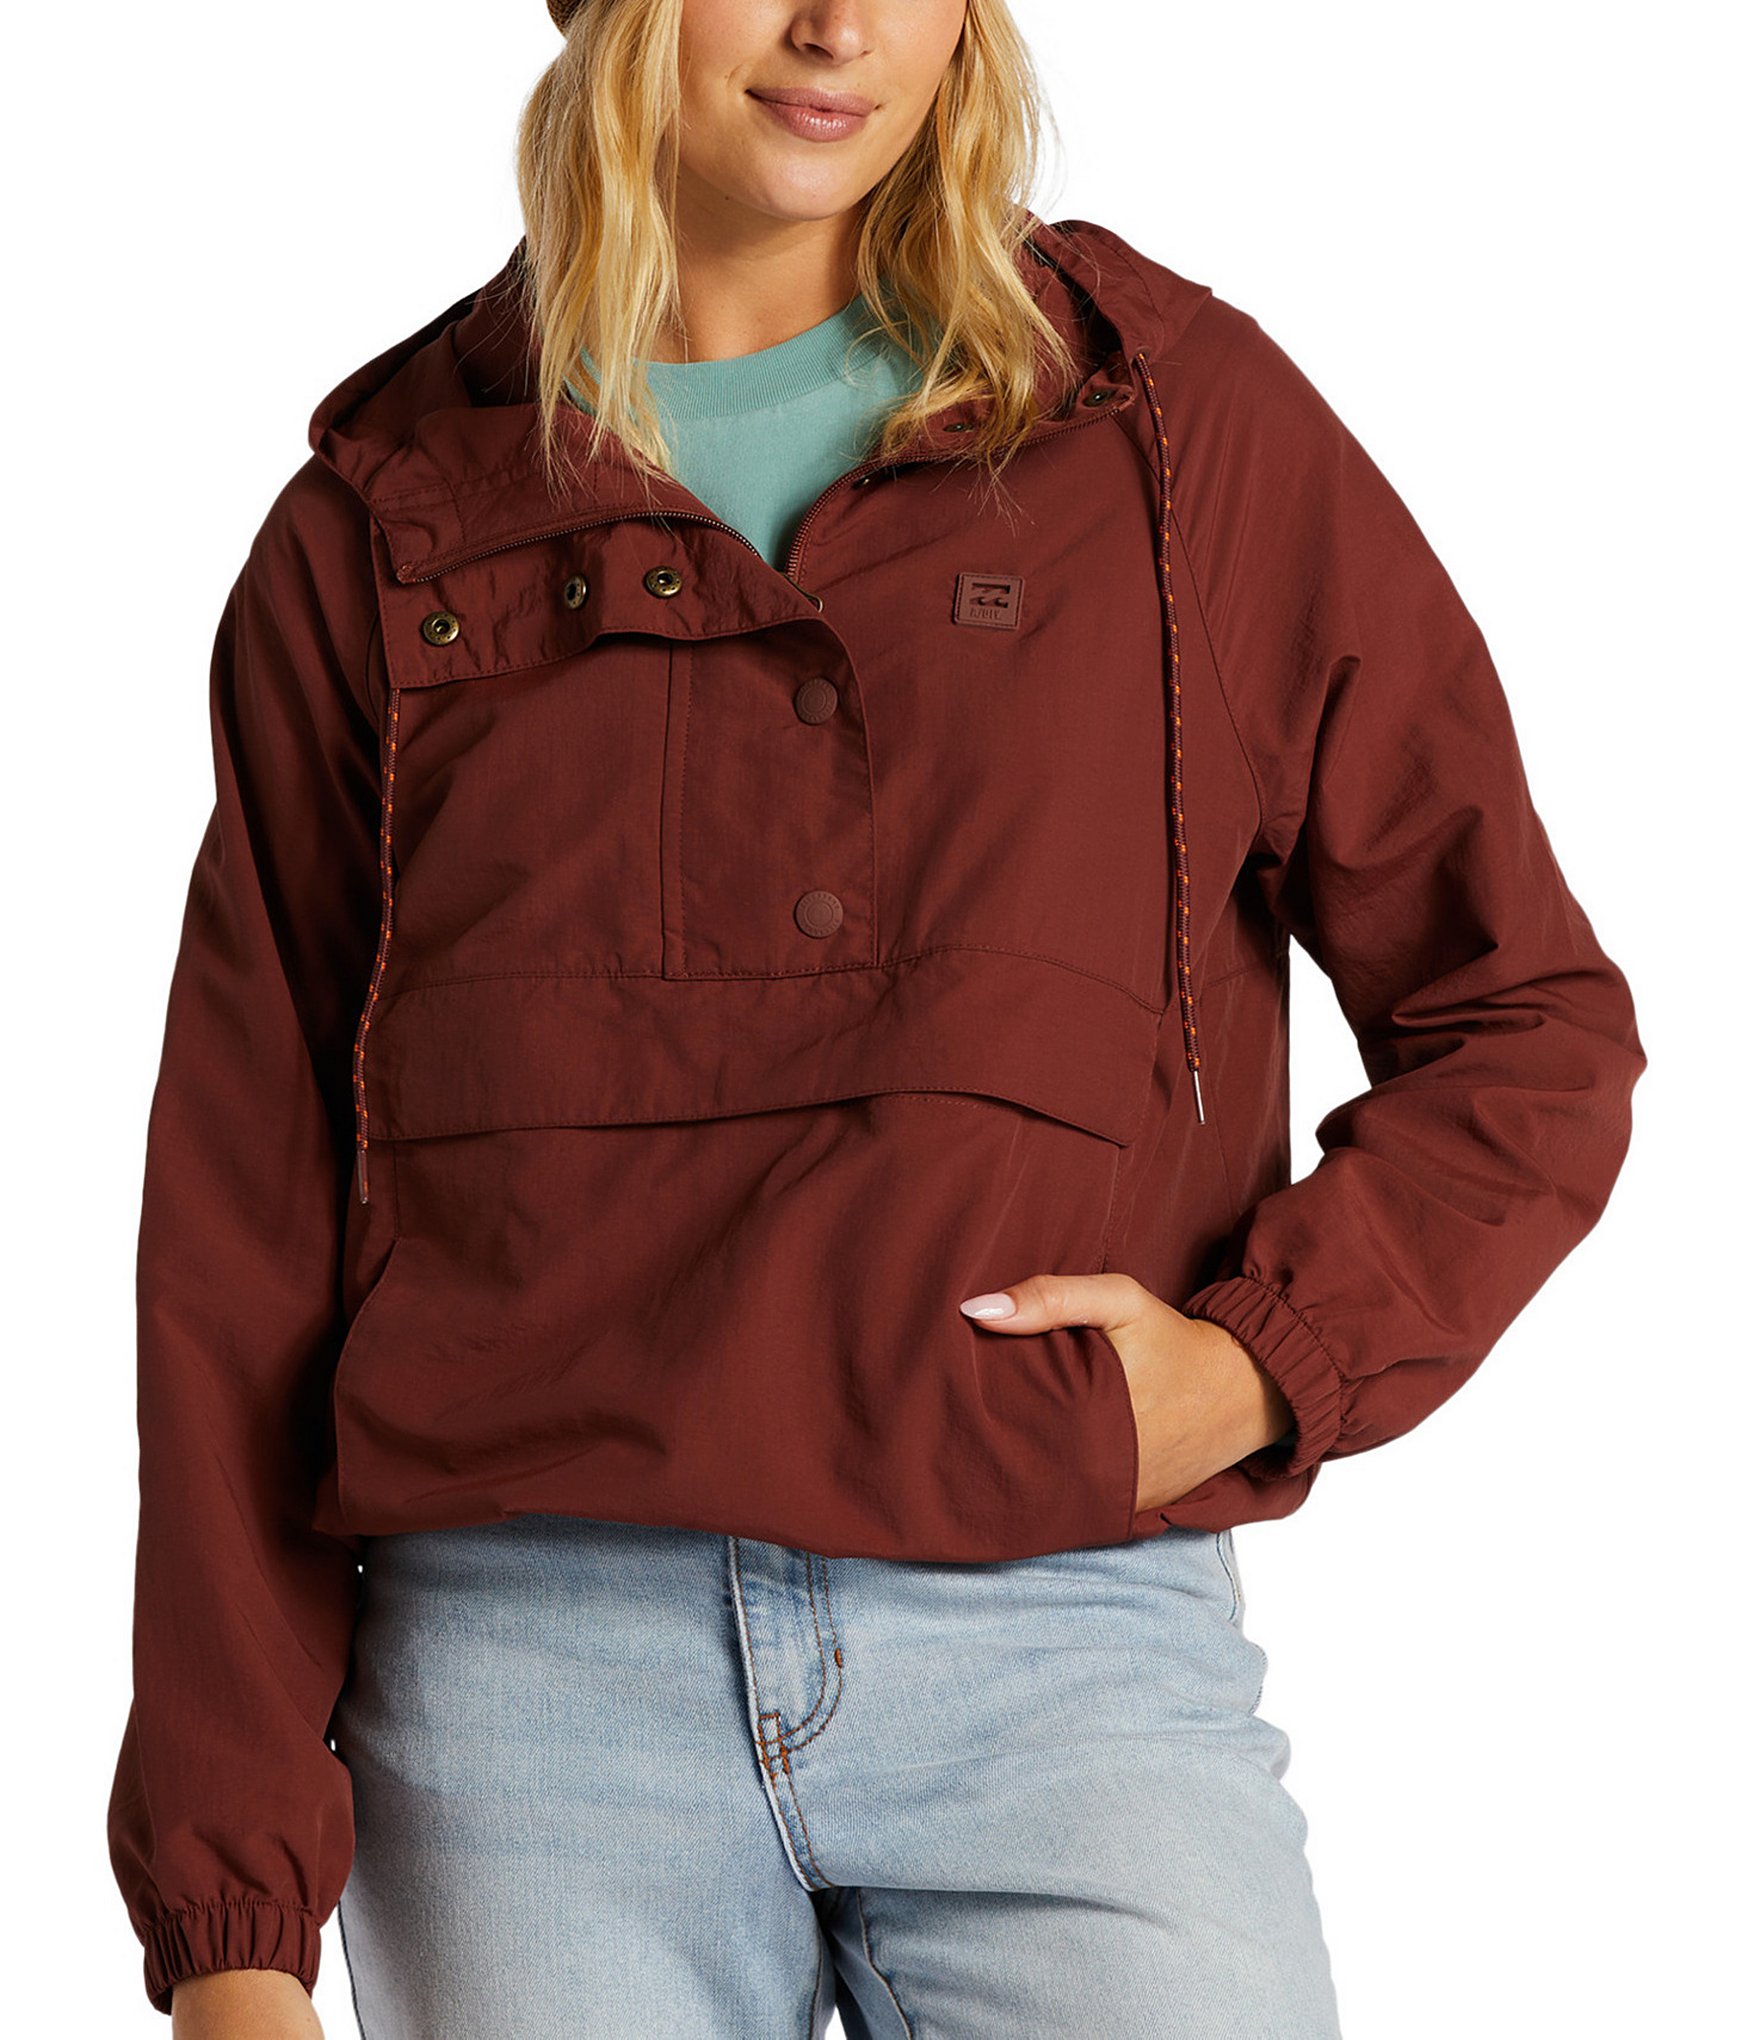 Trail Along - Anorak Pullover Jacket for Women